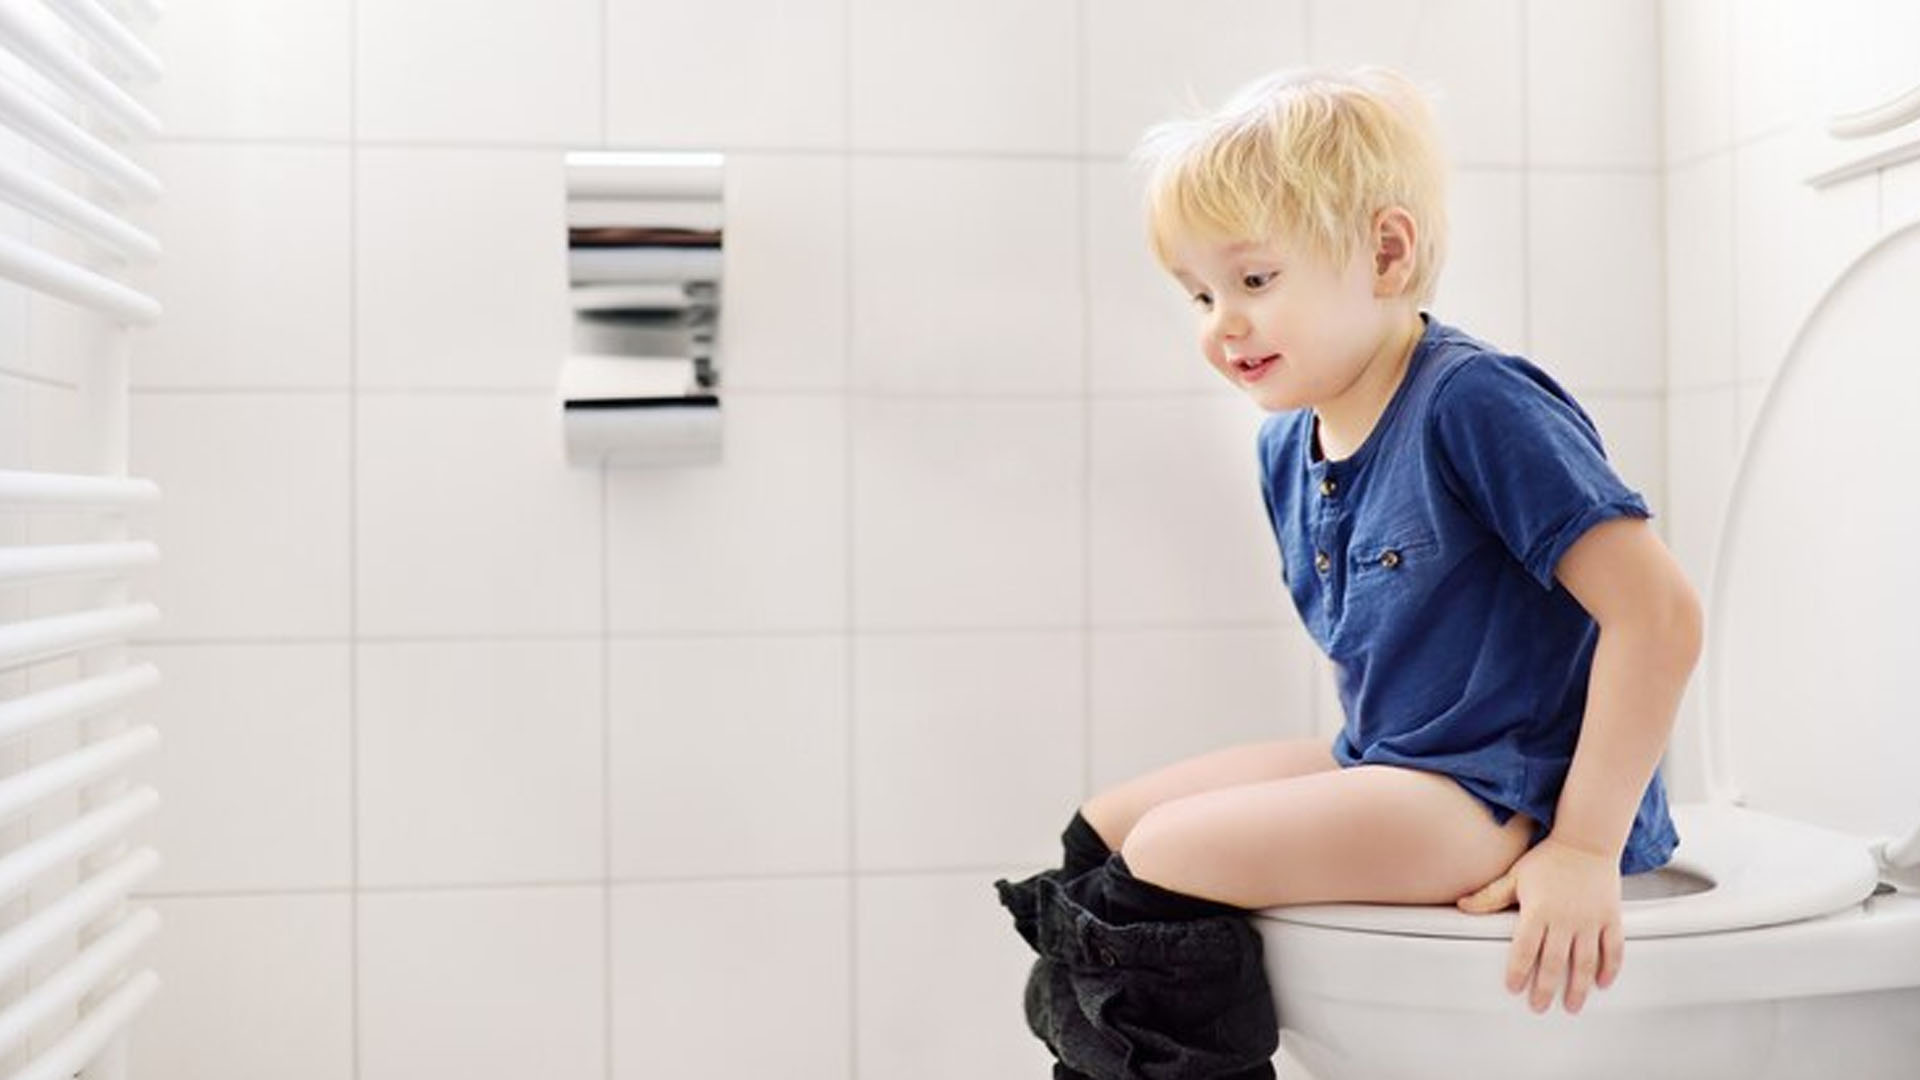 What are the Home Remedies for frequent urination in Children?